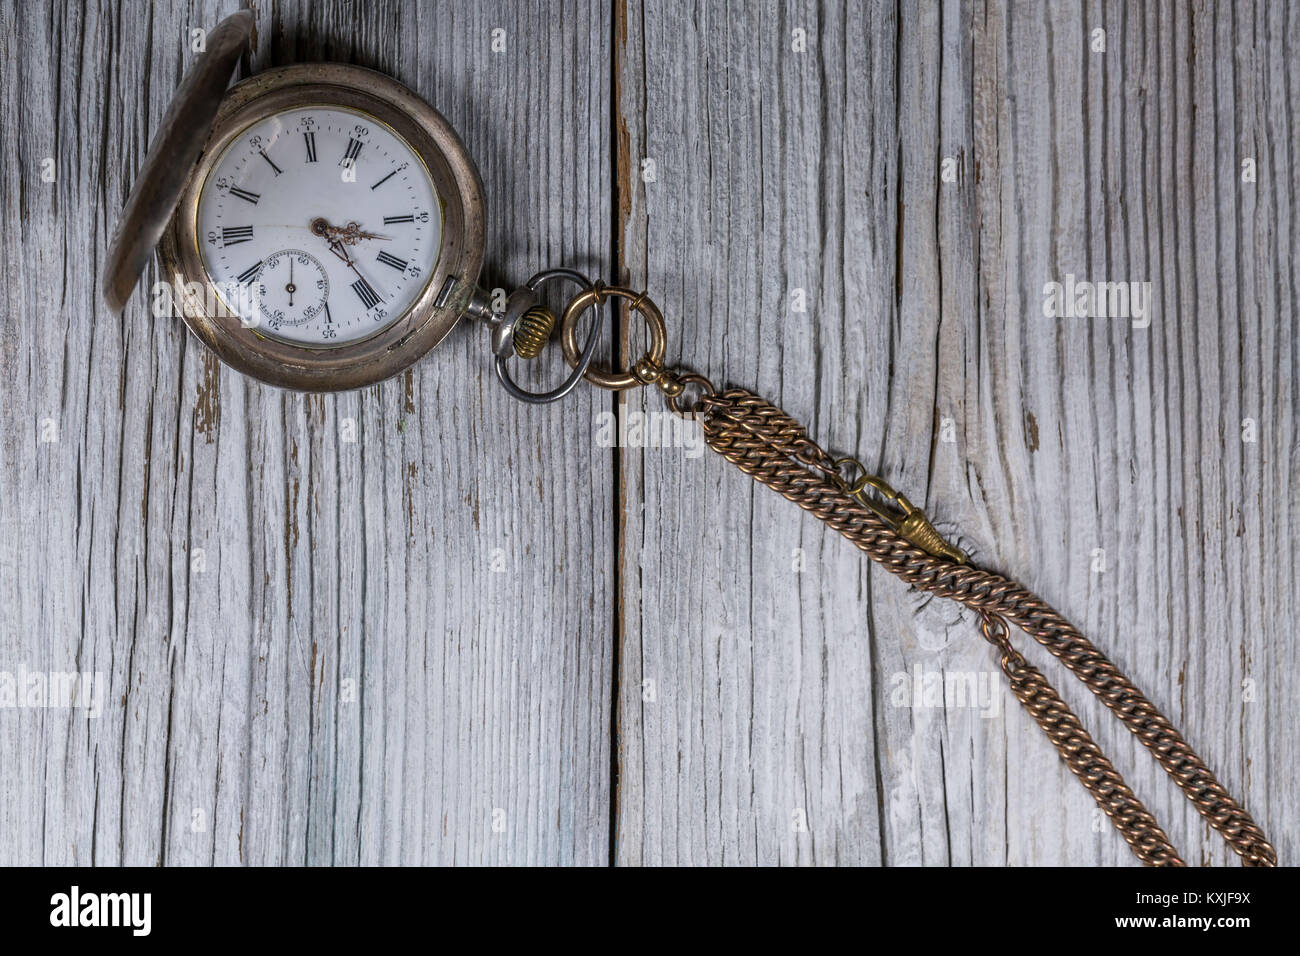 Image of an old antique pocket watch lying on an old rustic wood background Stock Photo